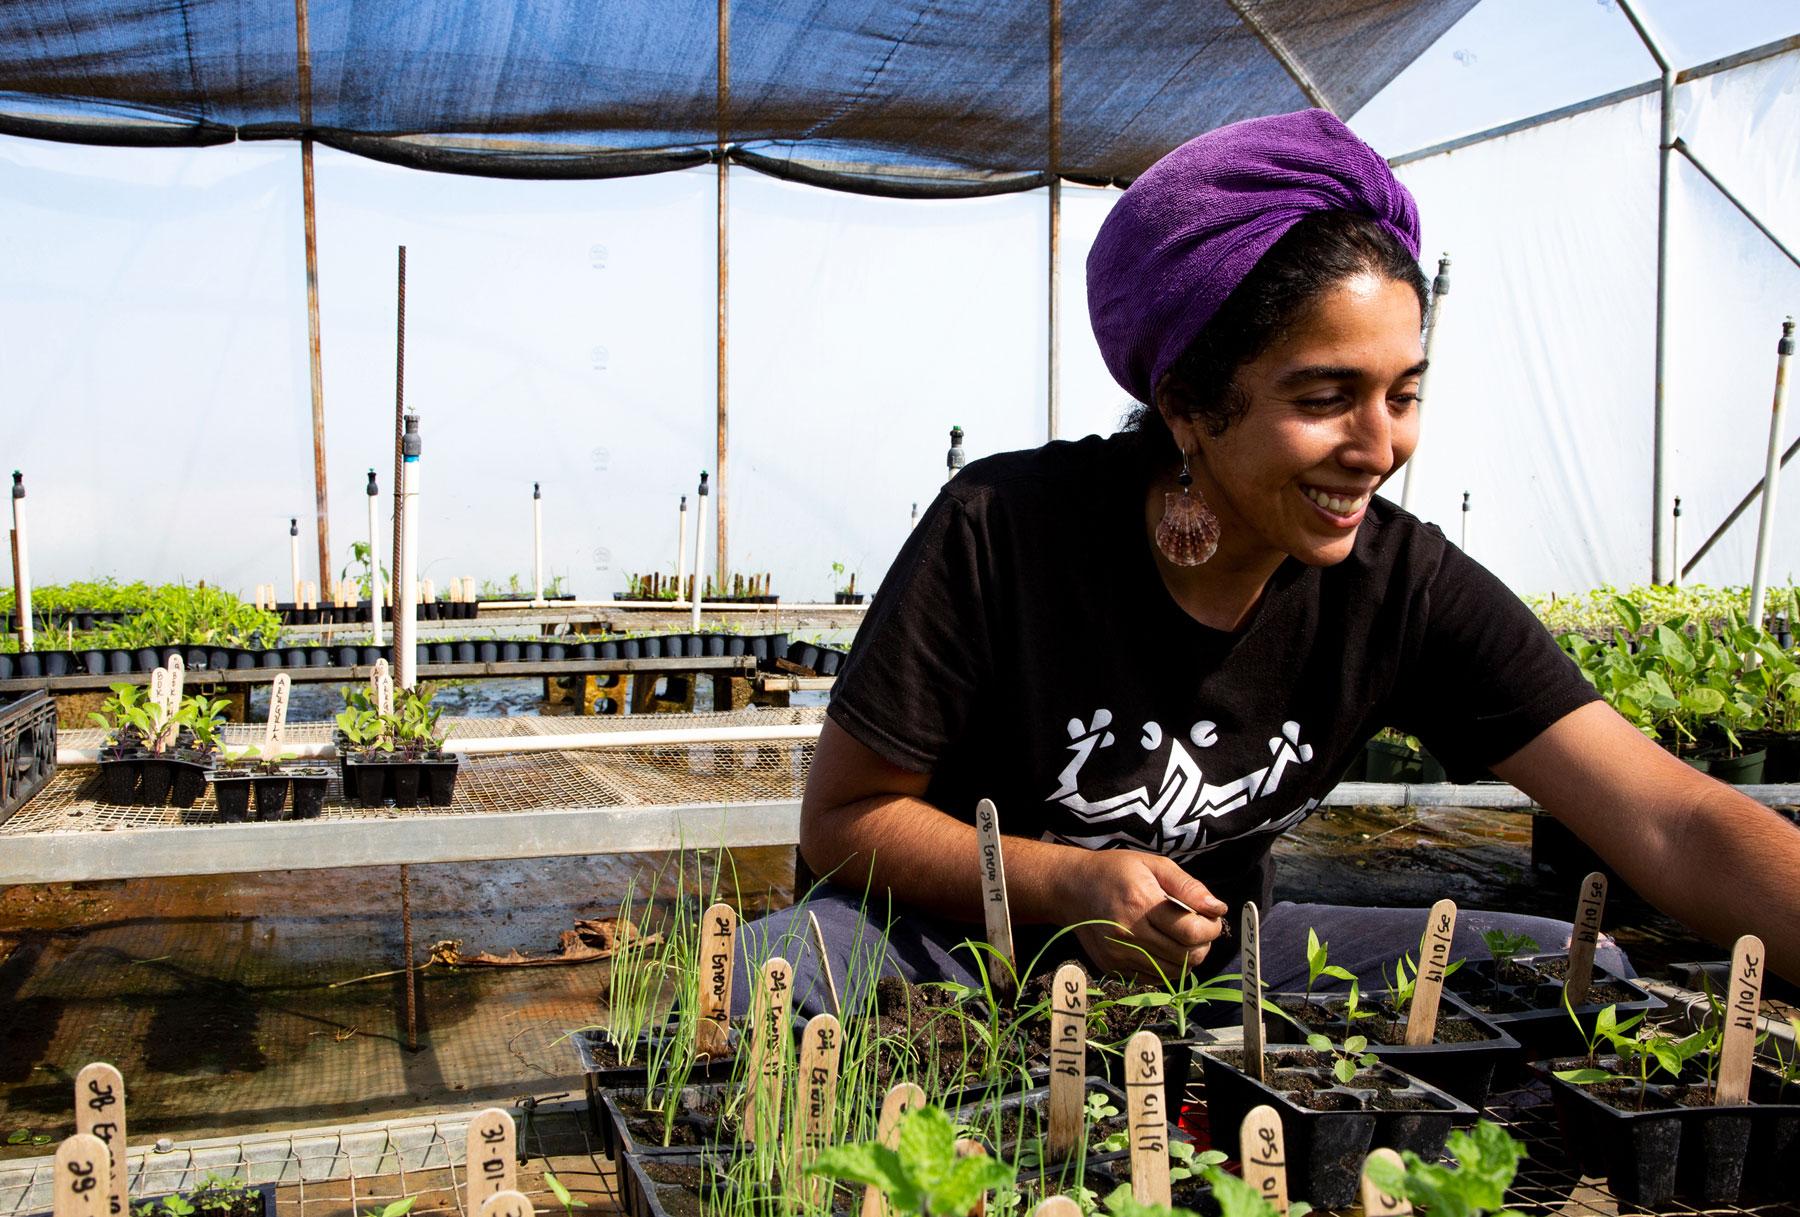 Alexandra Robles is shown in a black shirt leaning over a table transplants seedlings in the greenhouse.